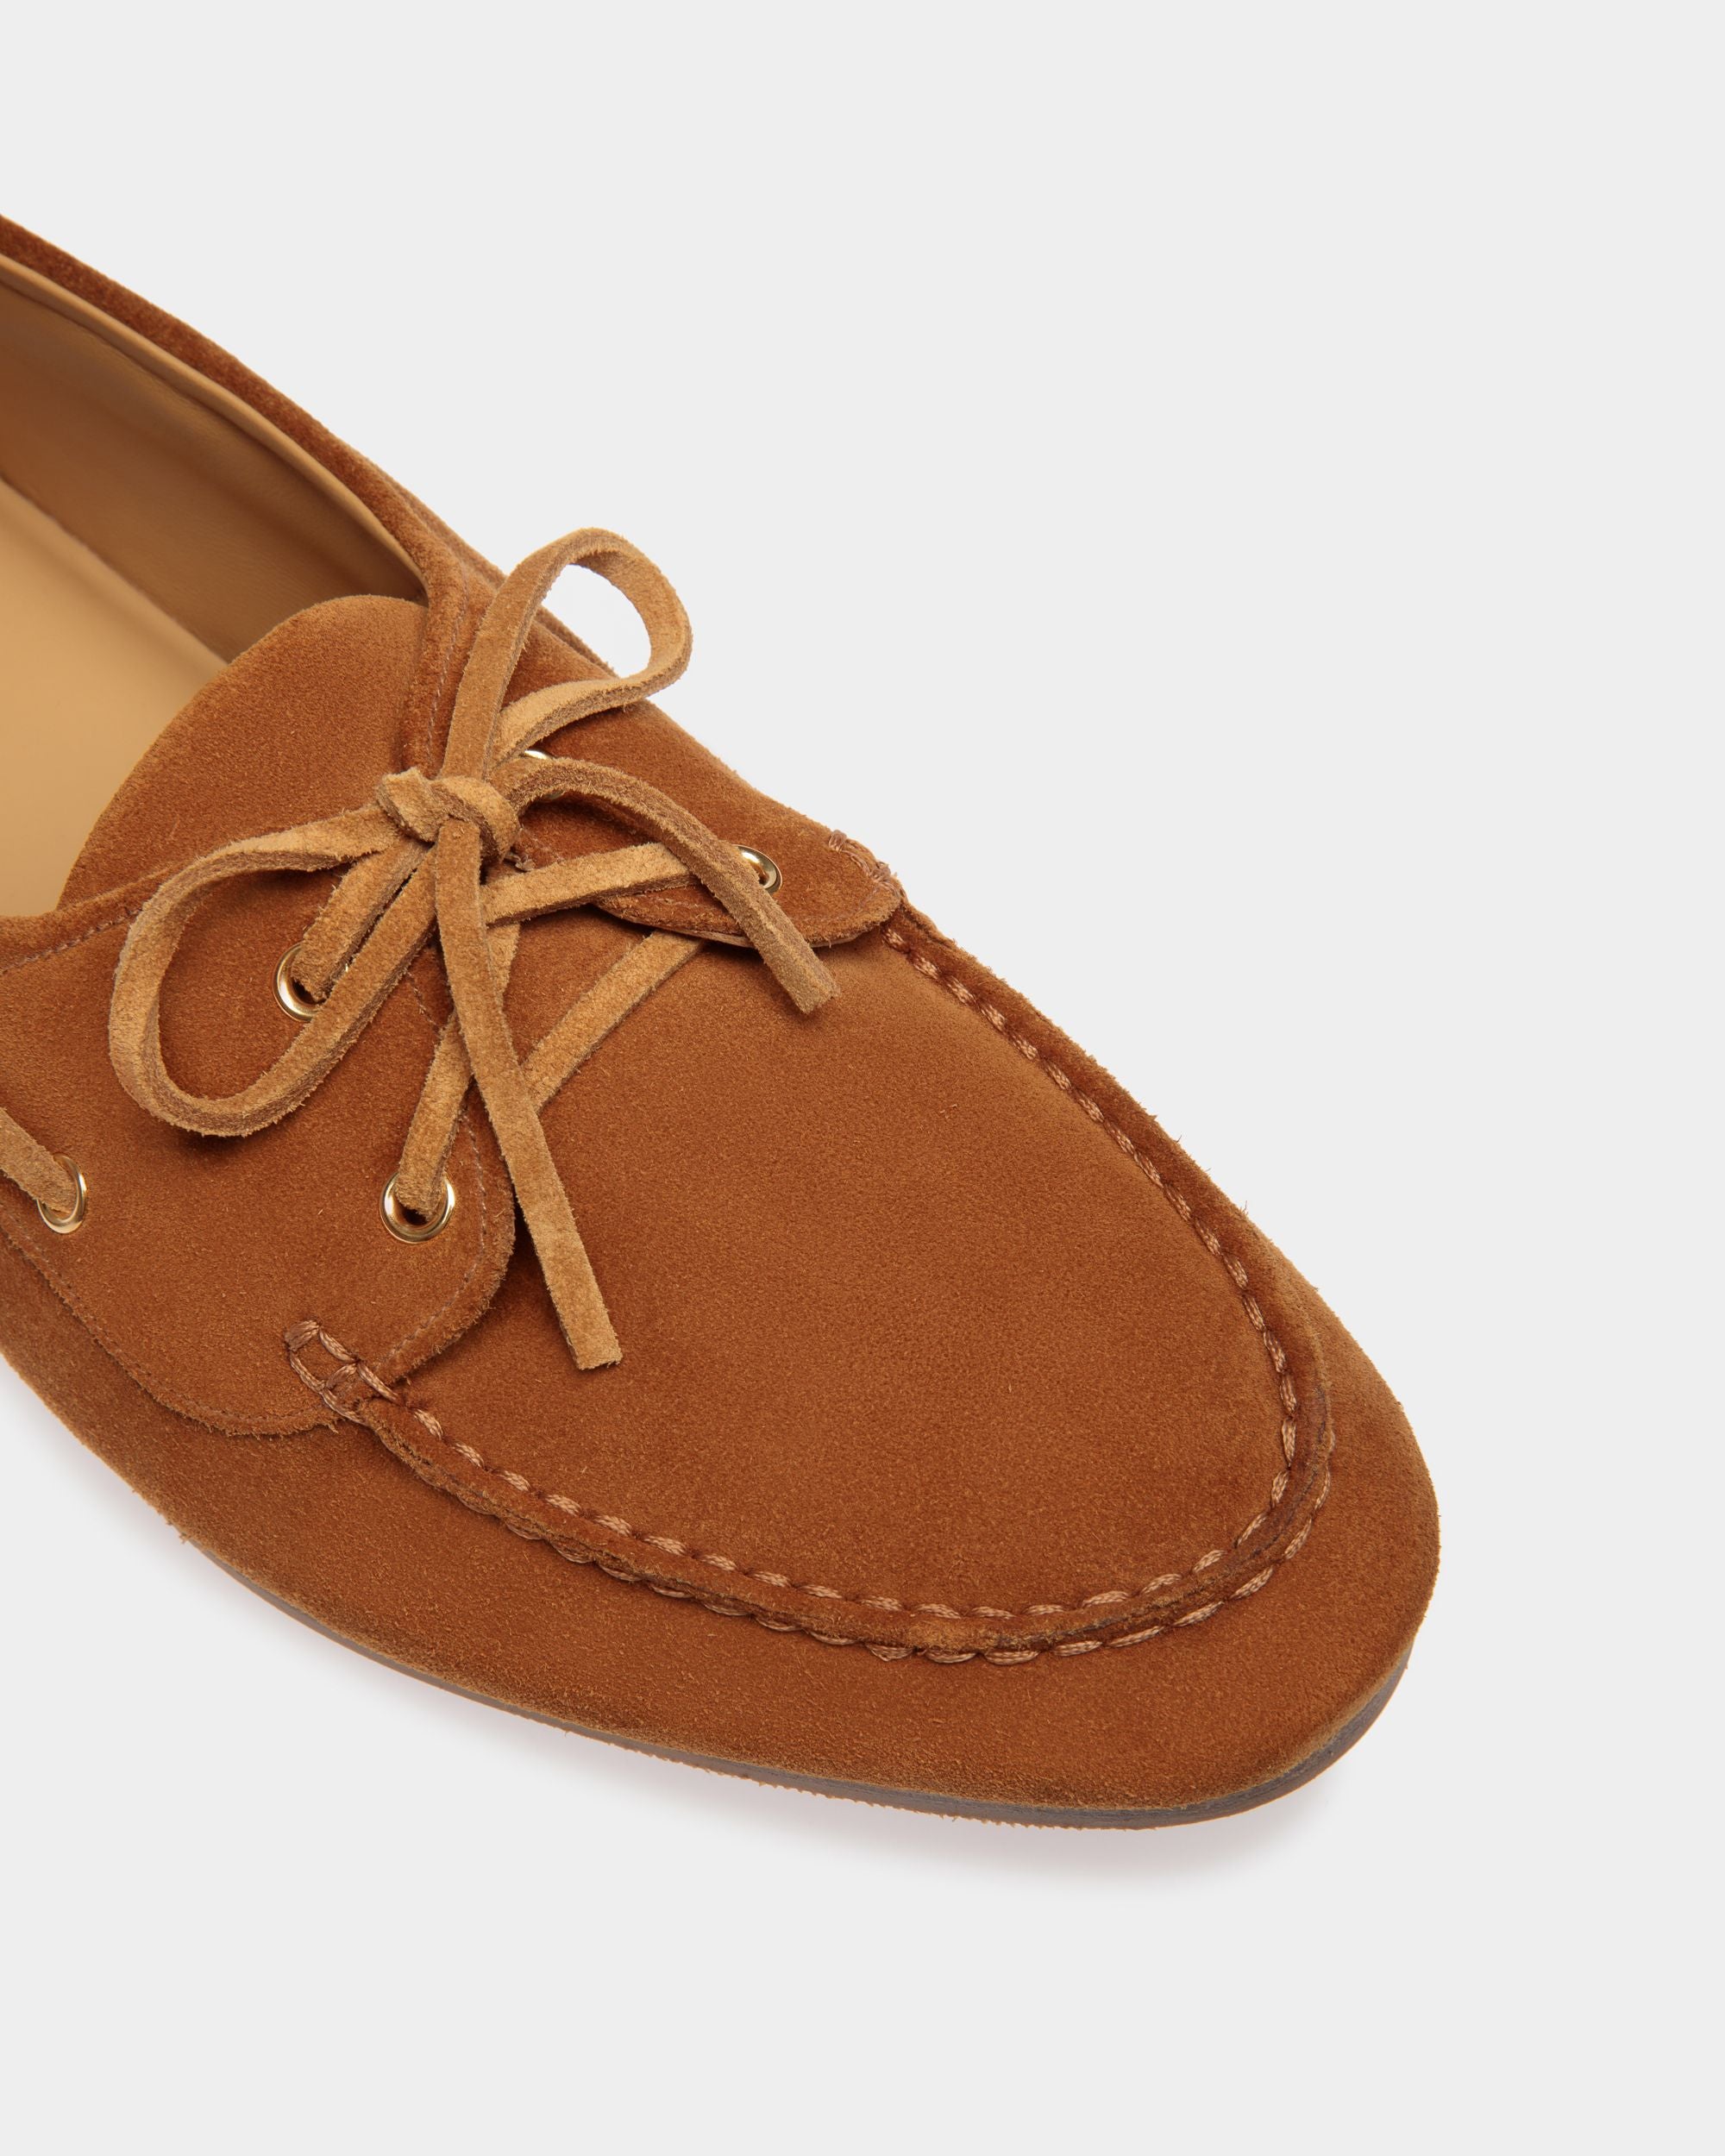 Plume | Men's Moccasin in Brown Suede| Bally | Still Life Detail